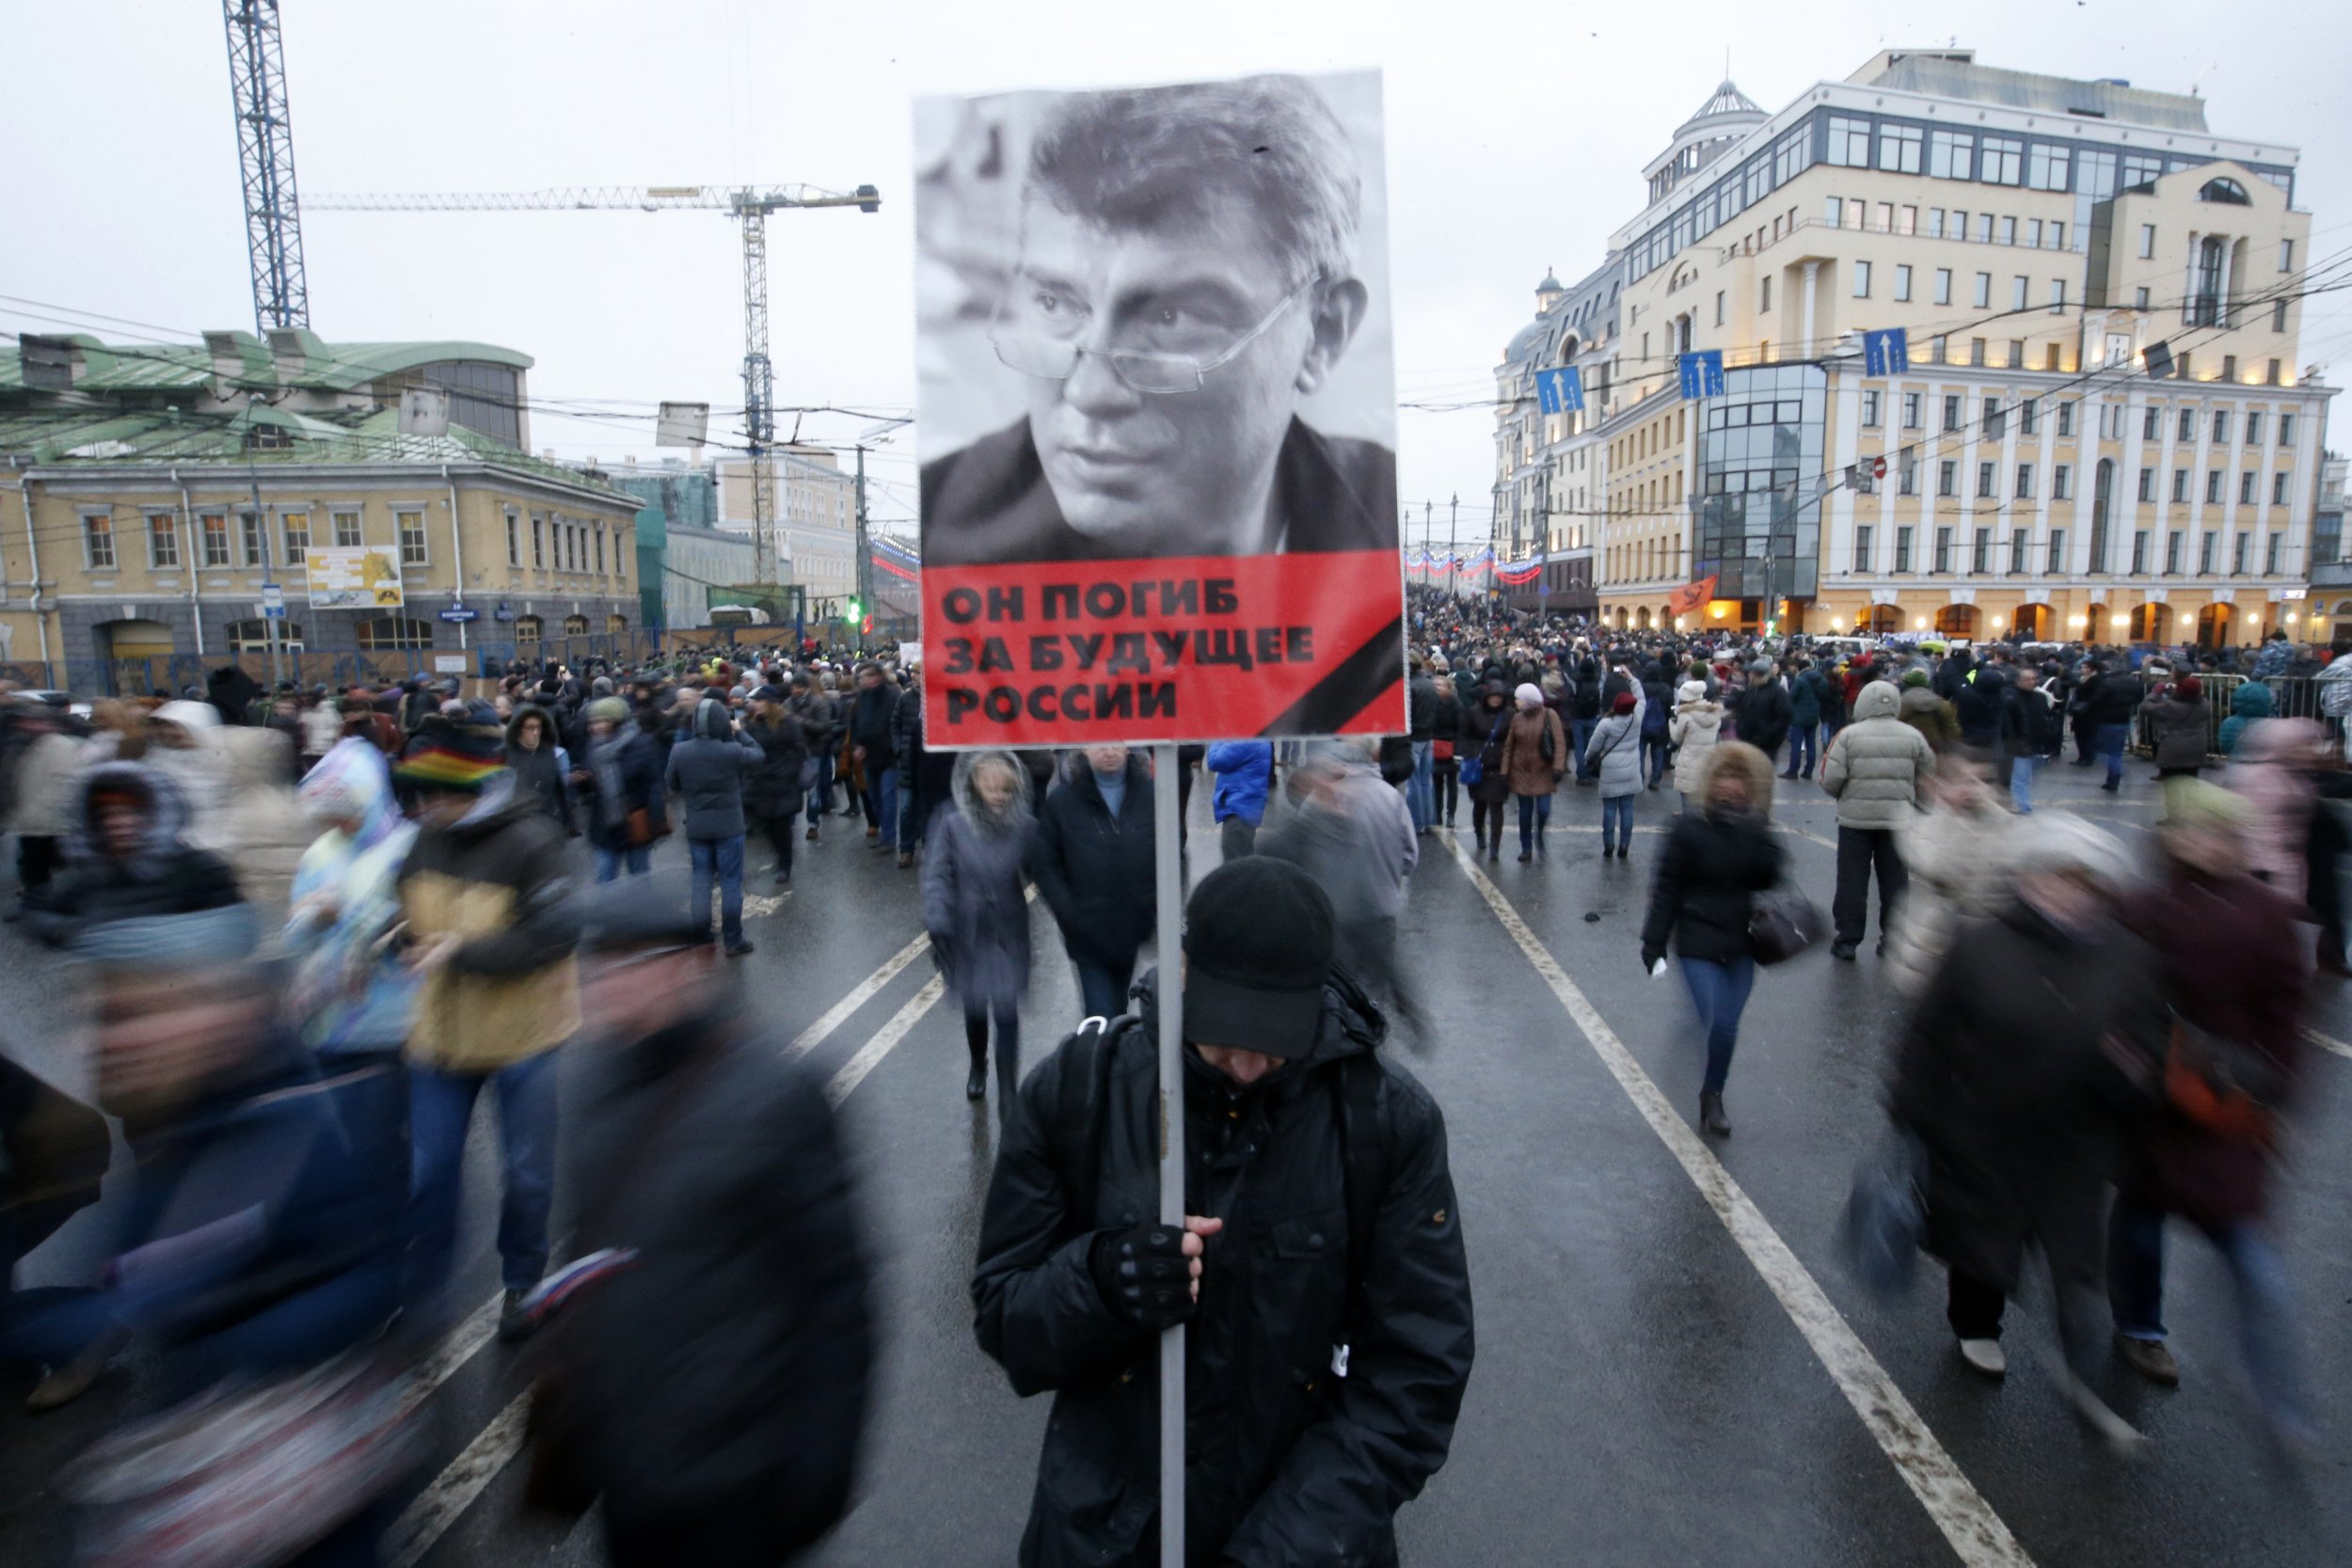 Nemtsov portrayed held above moving crowds in Moscow